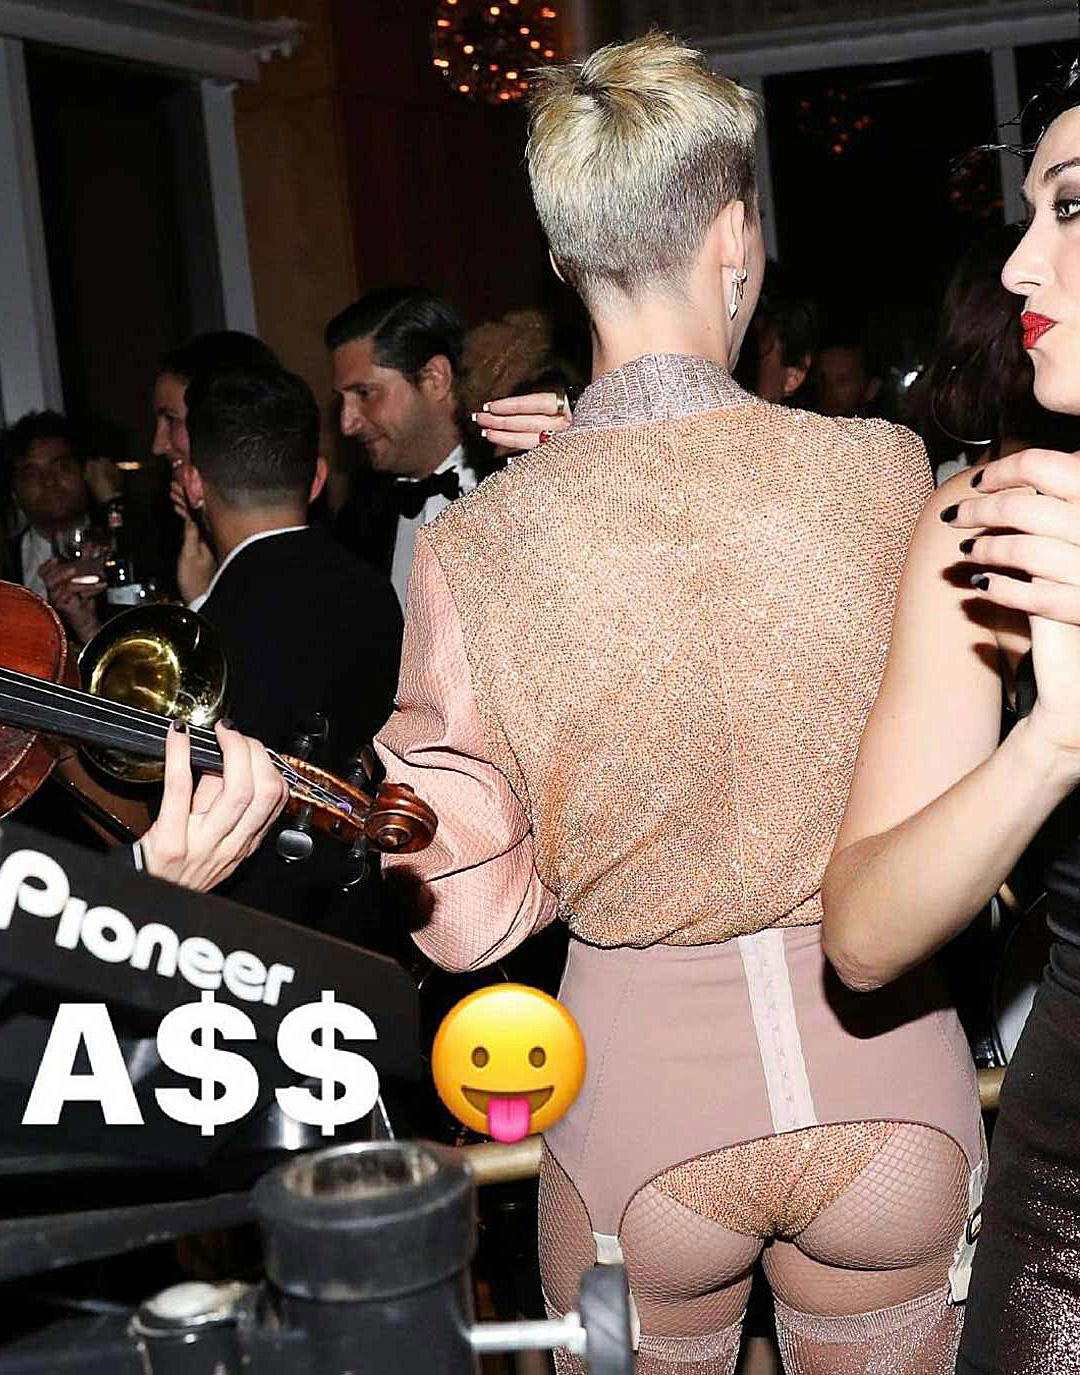 Katy perry butt naked